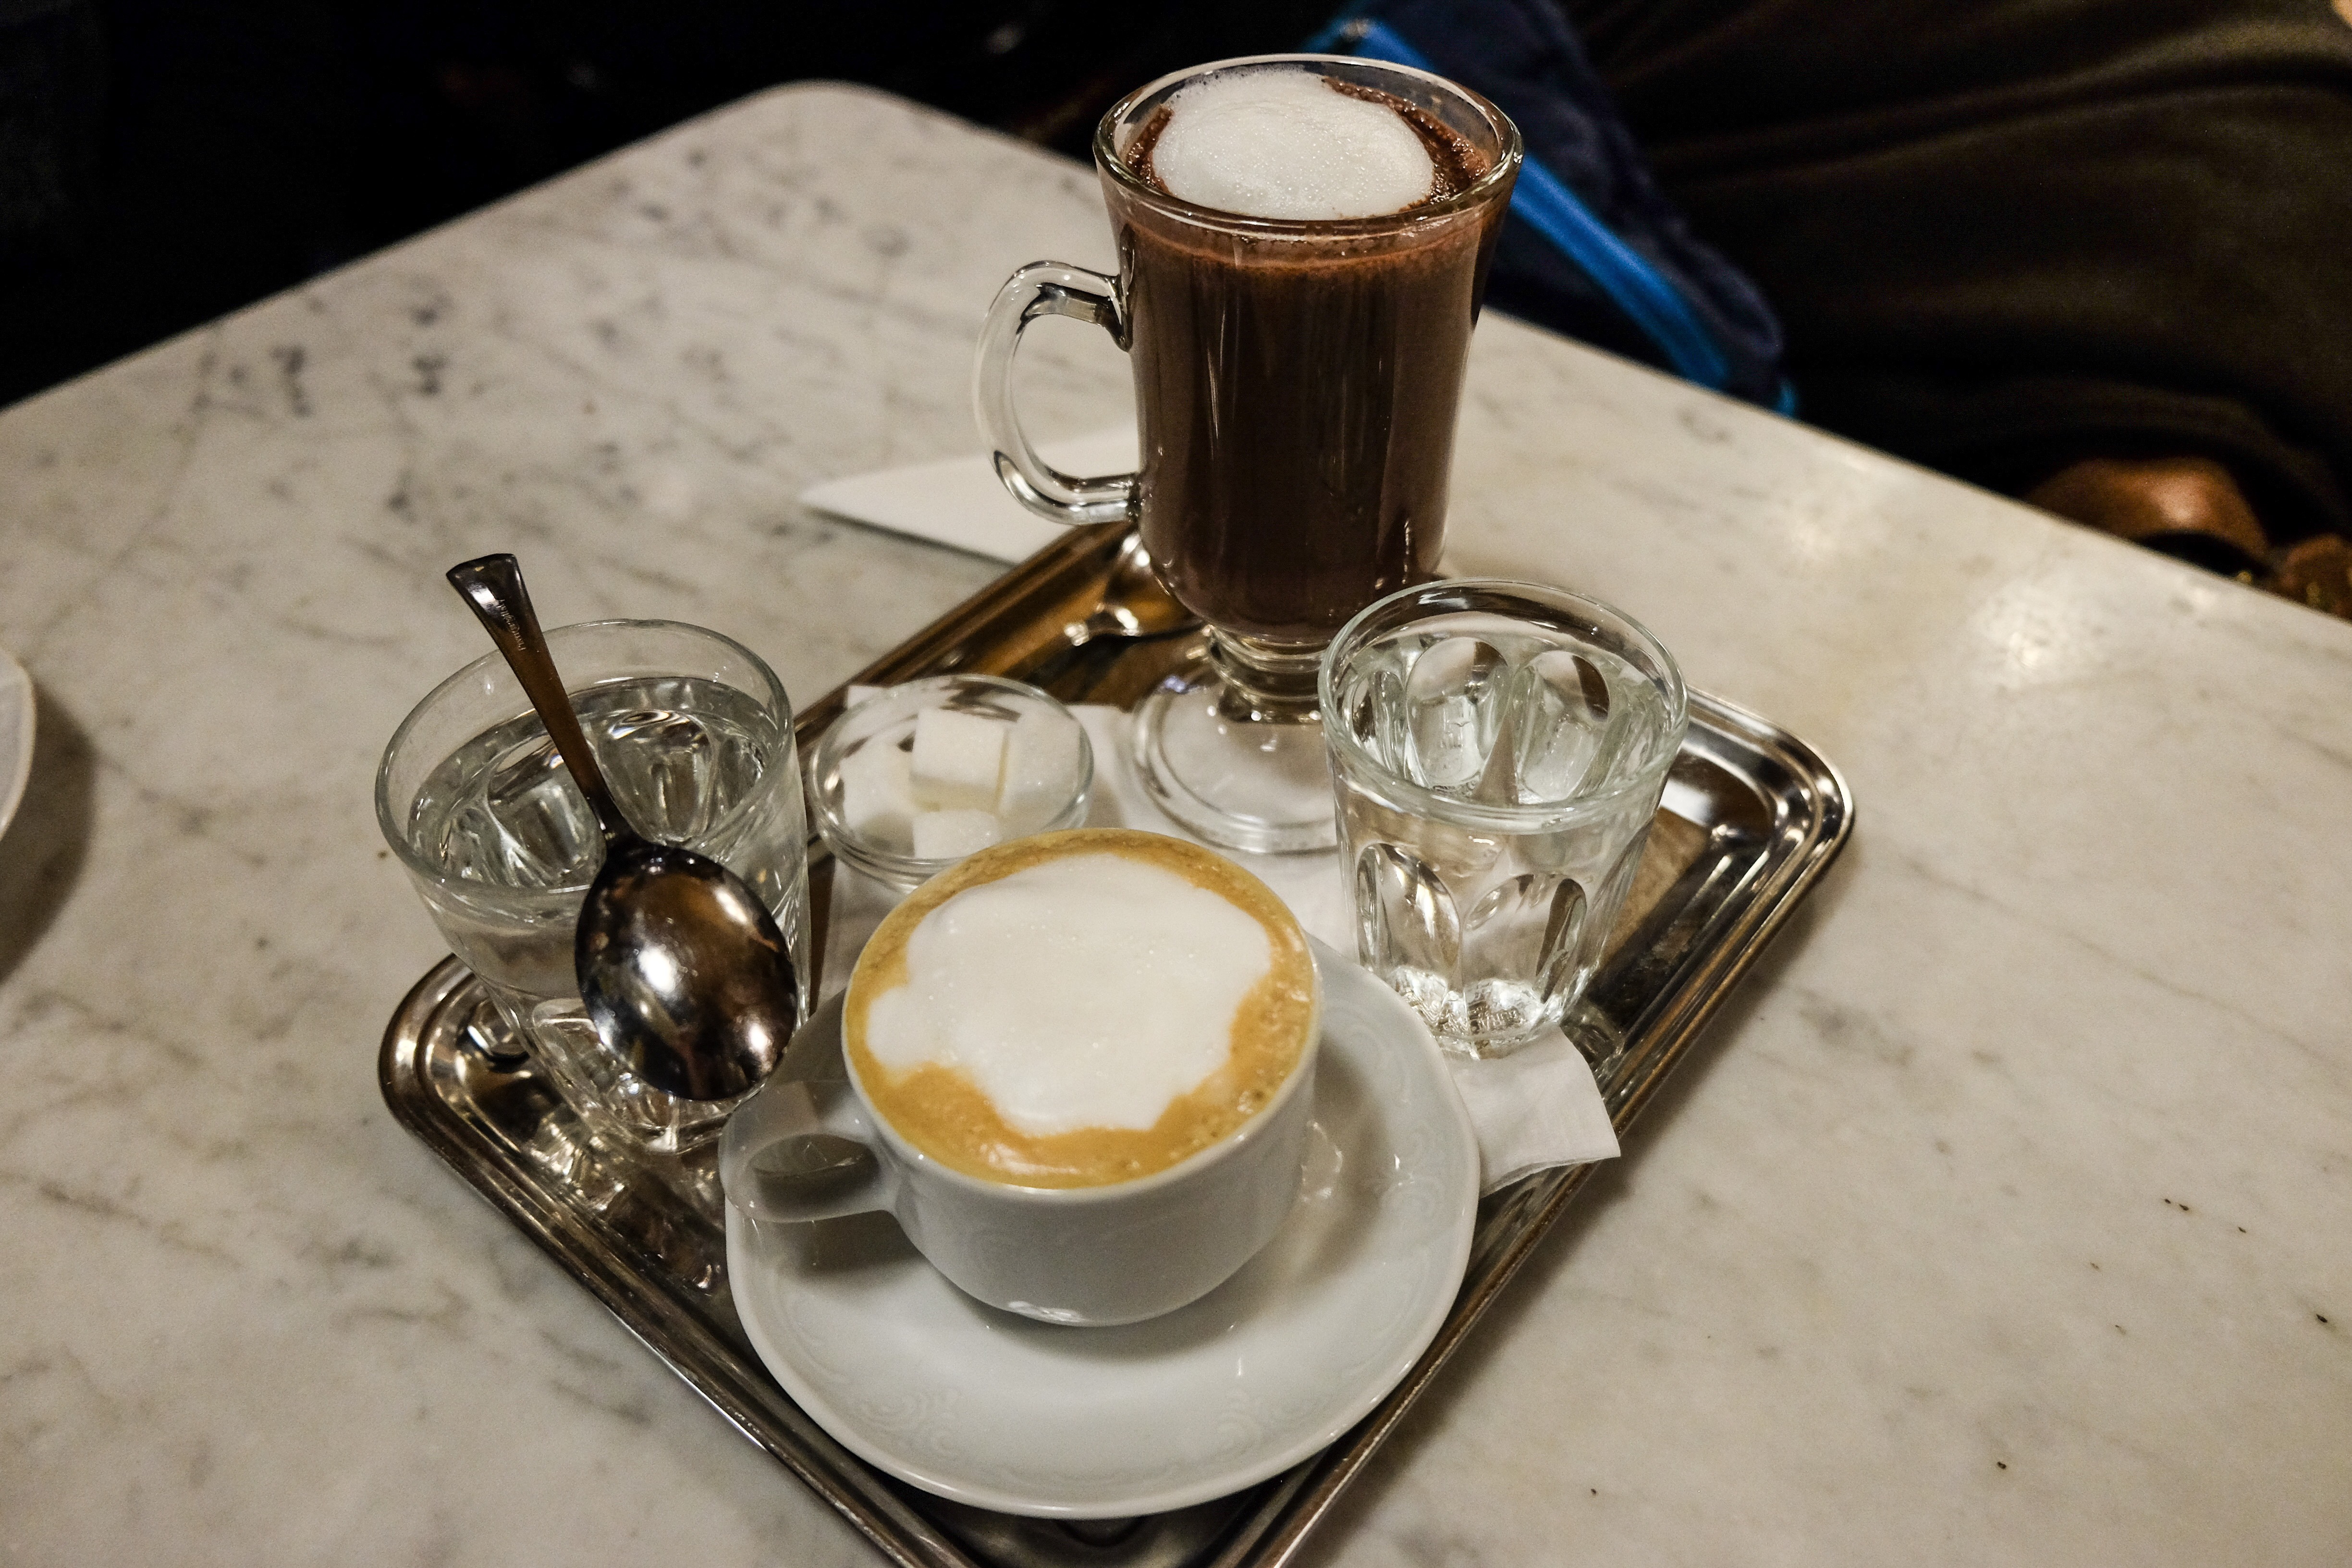 Coffee and hot chocolate on a tray